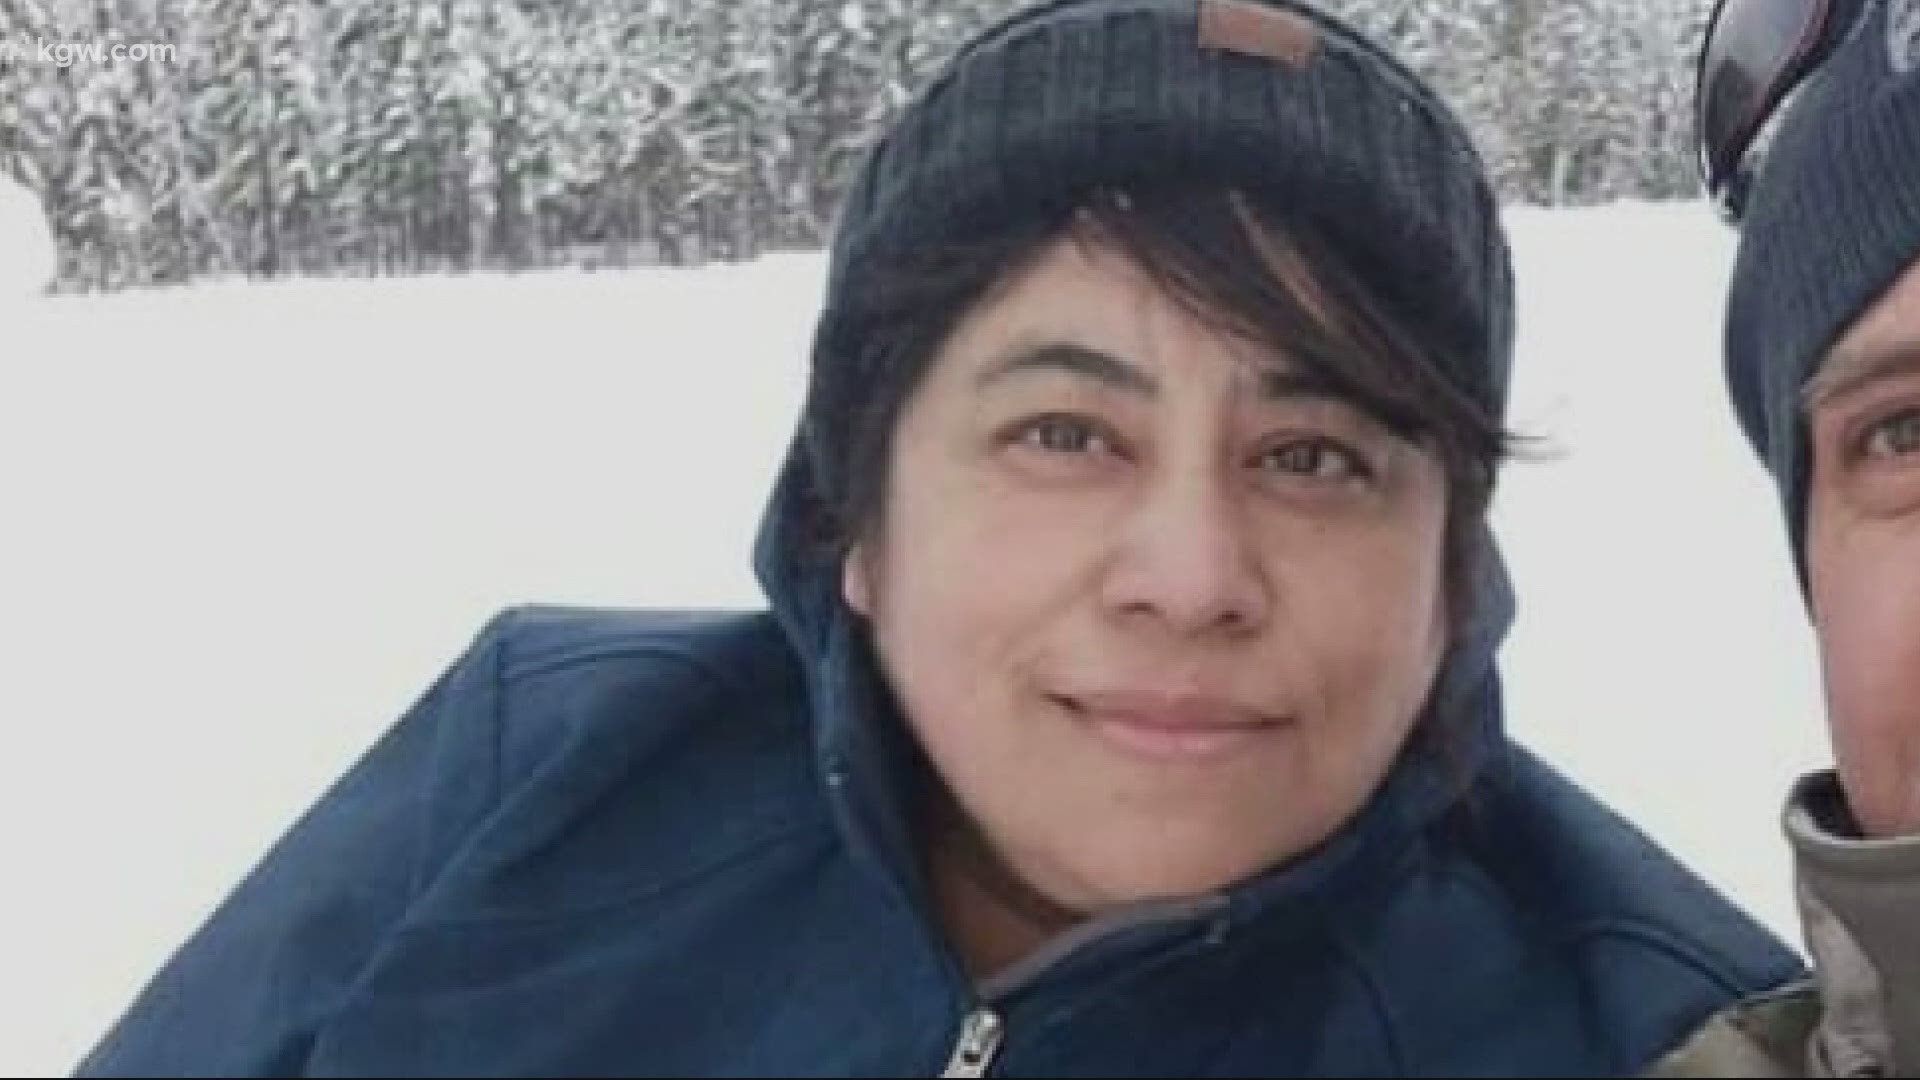 Loved ones say 46-year-old Carola Montero was kind, generous and devoted to her family. They're warning others about COVID-19 to honor her.